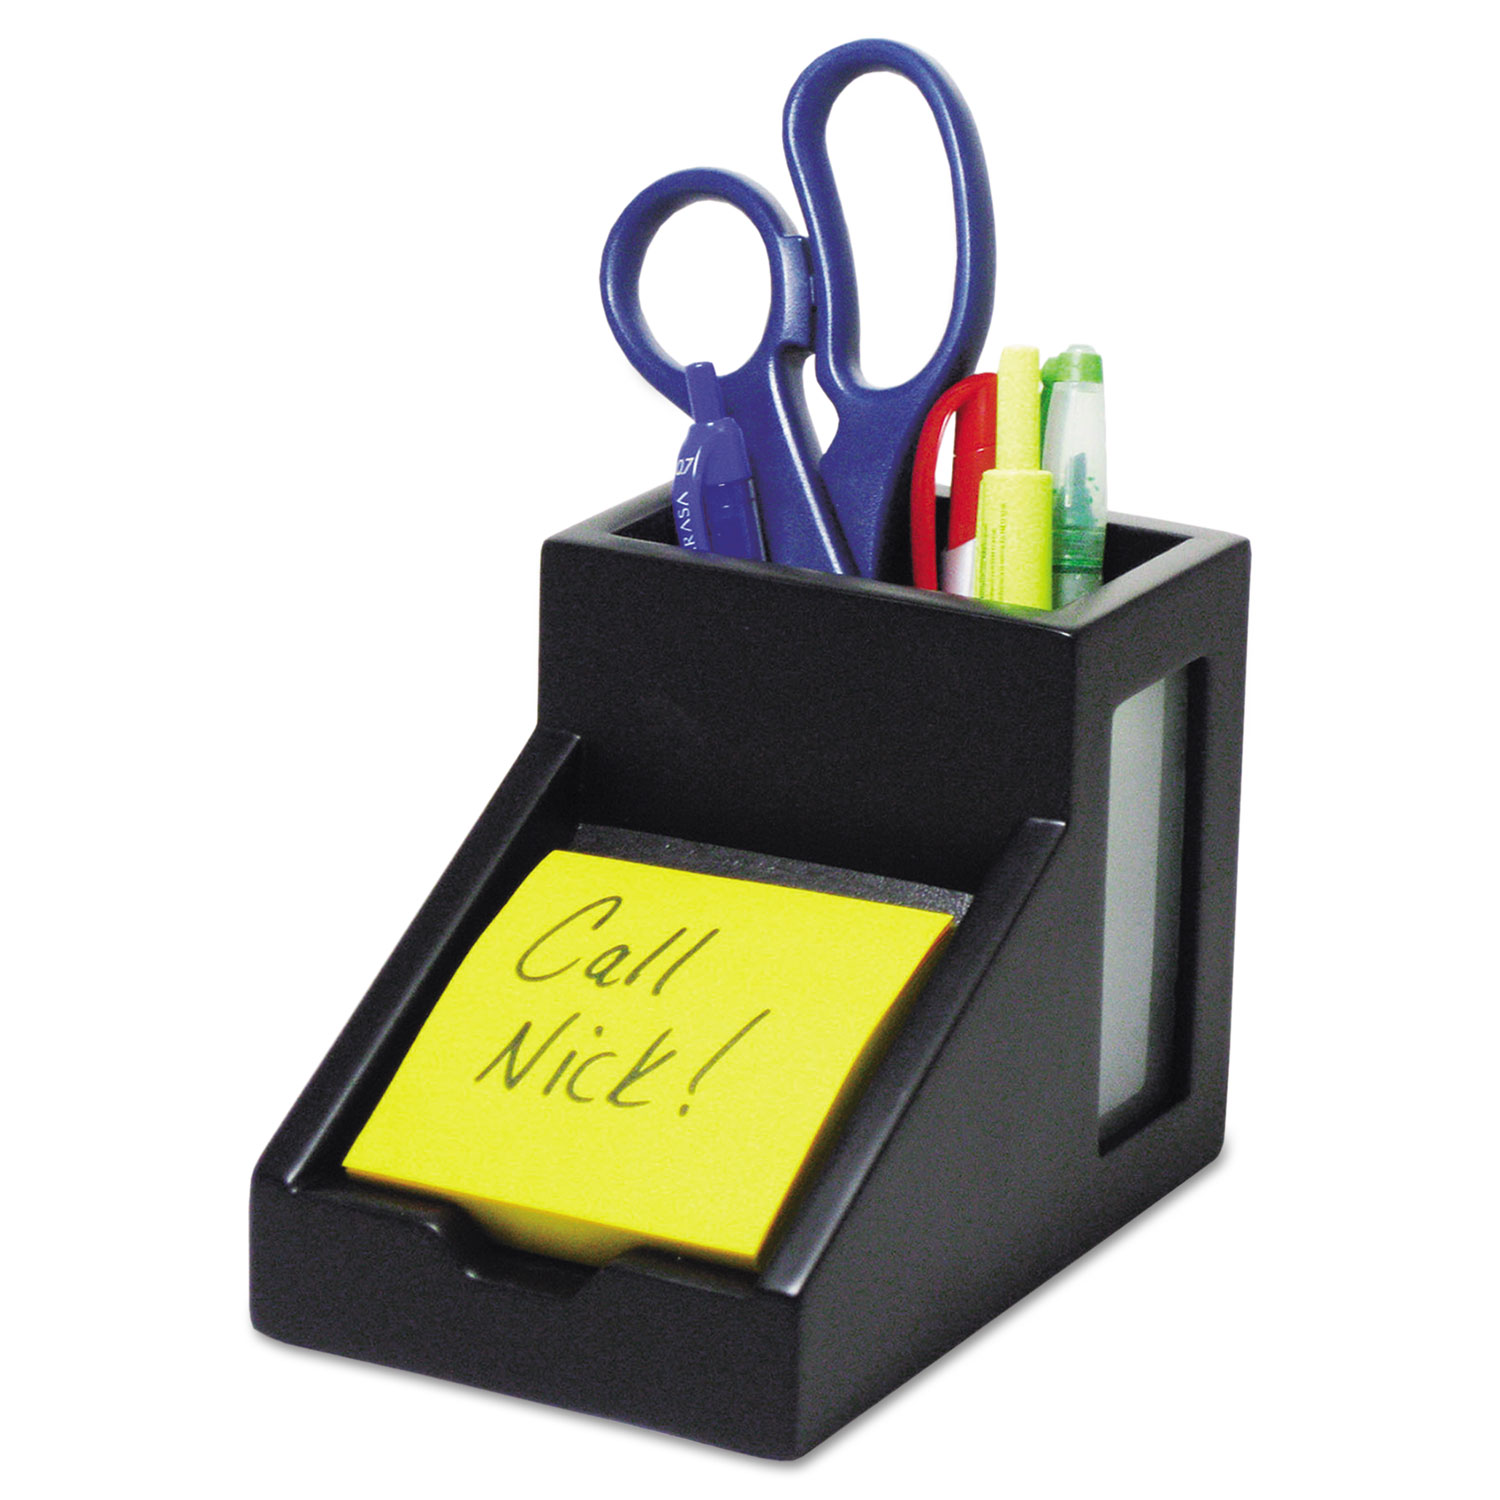  Victor 9505-5 Midnight Black Collection Pencil Cup with Note Holder, 4 x 6 3/10 x 4 1/2, Wood (VCT95055) 